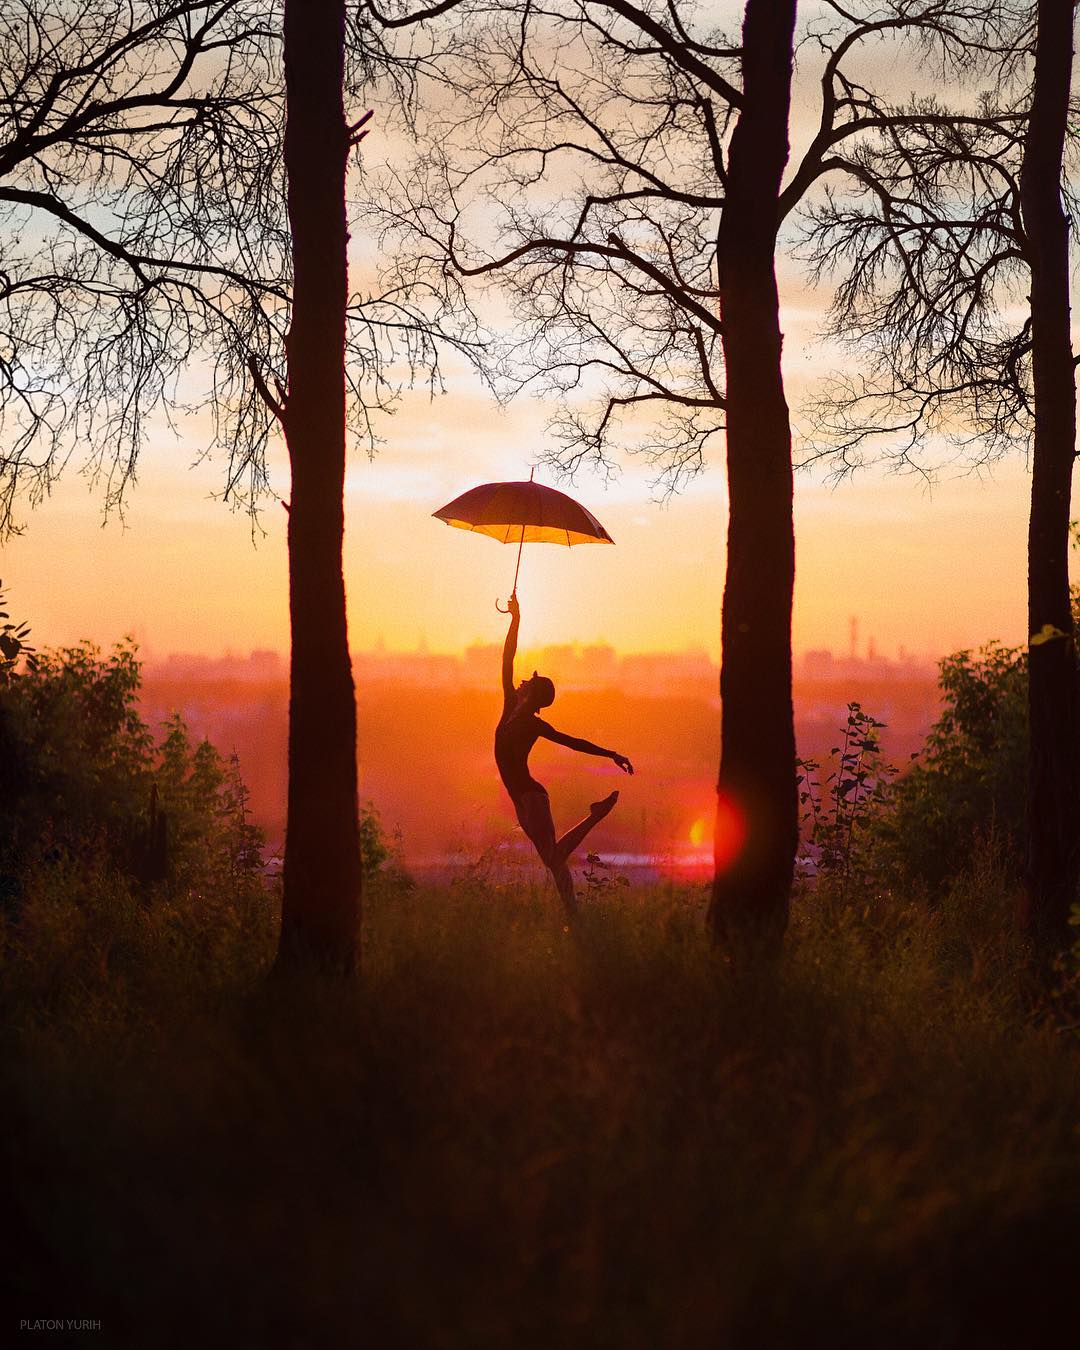 Surreal Conceptual Photography by Platon Yurich